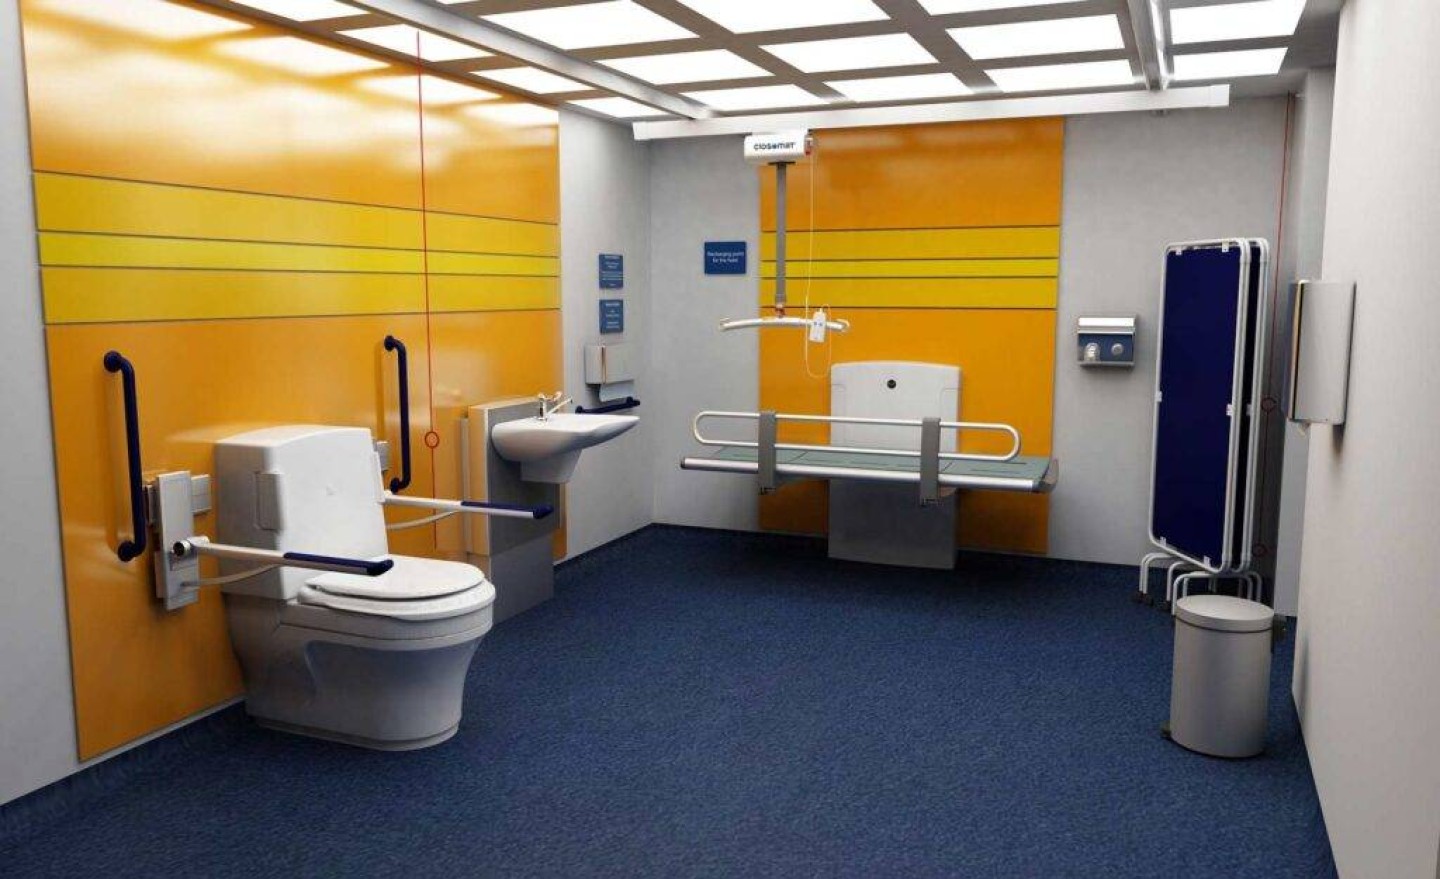 Accessible toilet with yellow walls